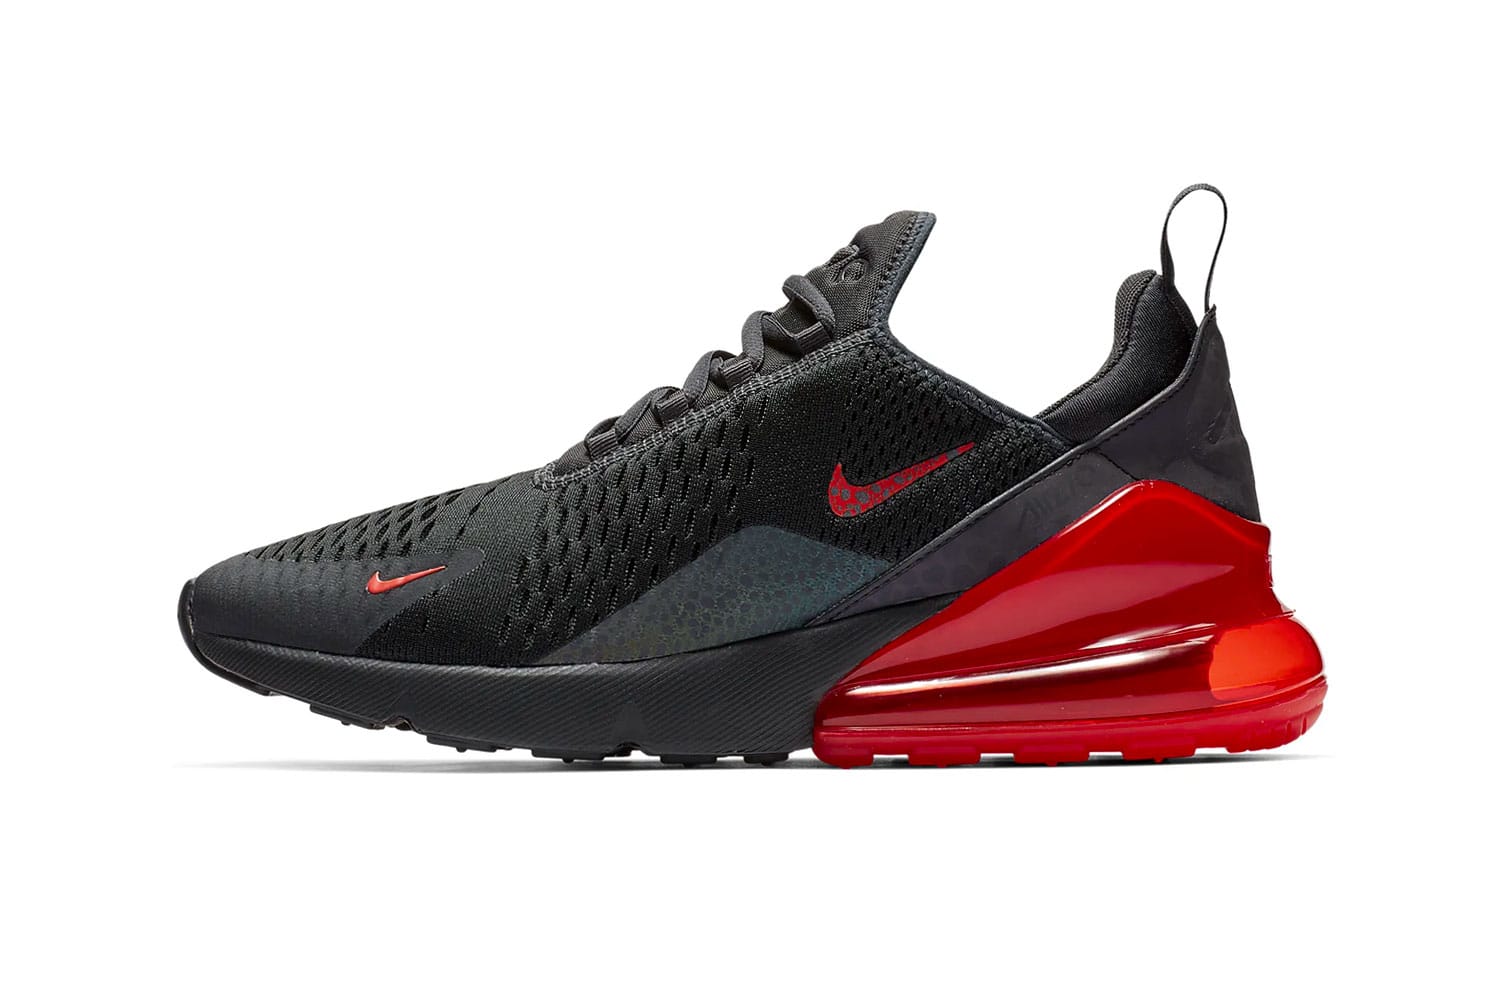 womens air max 270 black and red